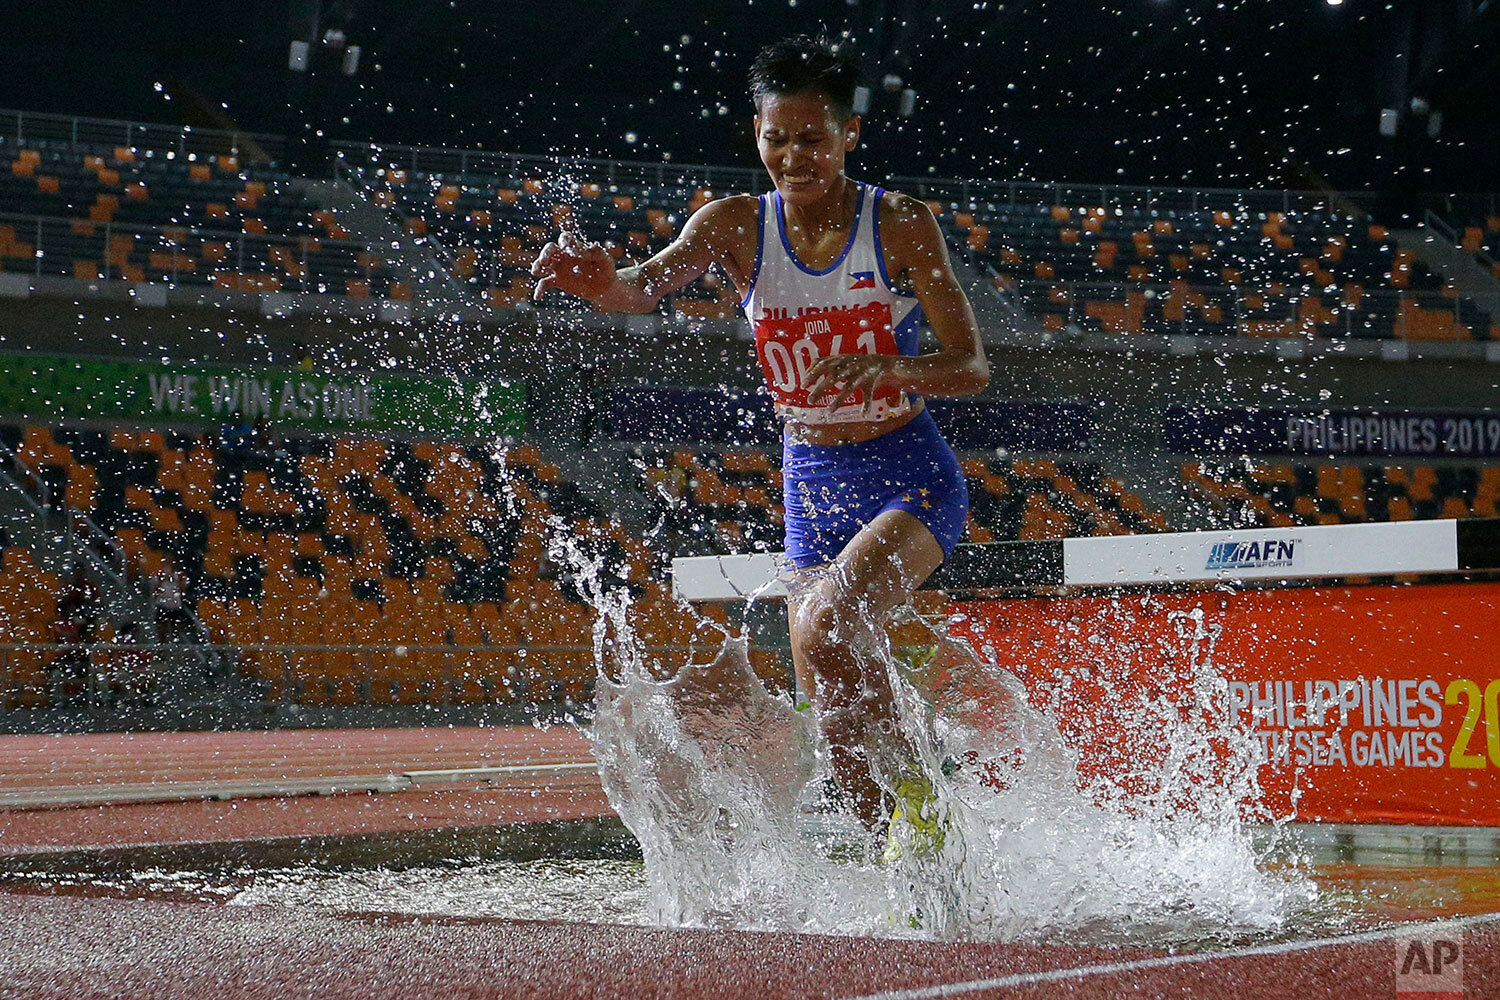  Philippine's Joida Gagnao competes in the women's 3000m steeplechase final during the athletics competition at the 30th Southeast Asian Games at Athletics Stadium in New Clark City, Tarlac province, northern Philippines on Tuesday, Dec. 10, 2019. Th